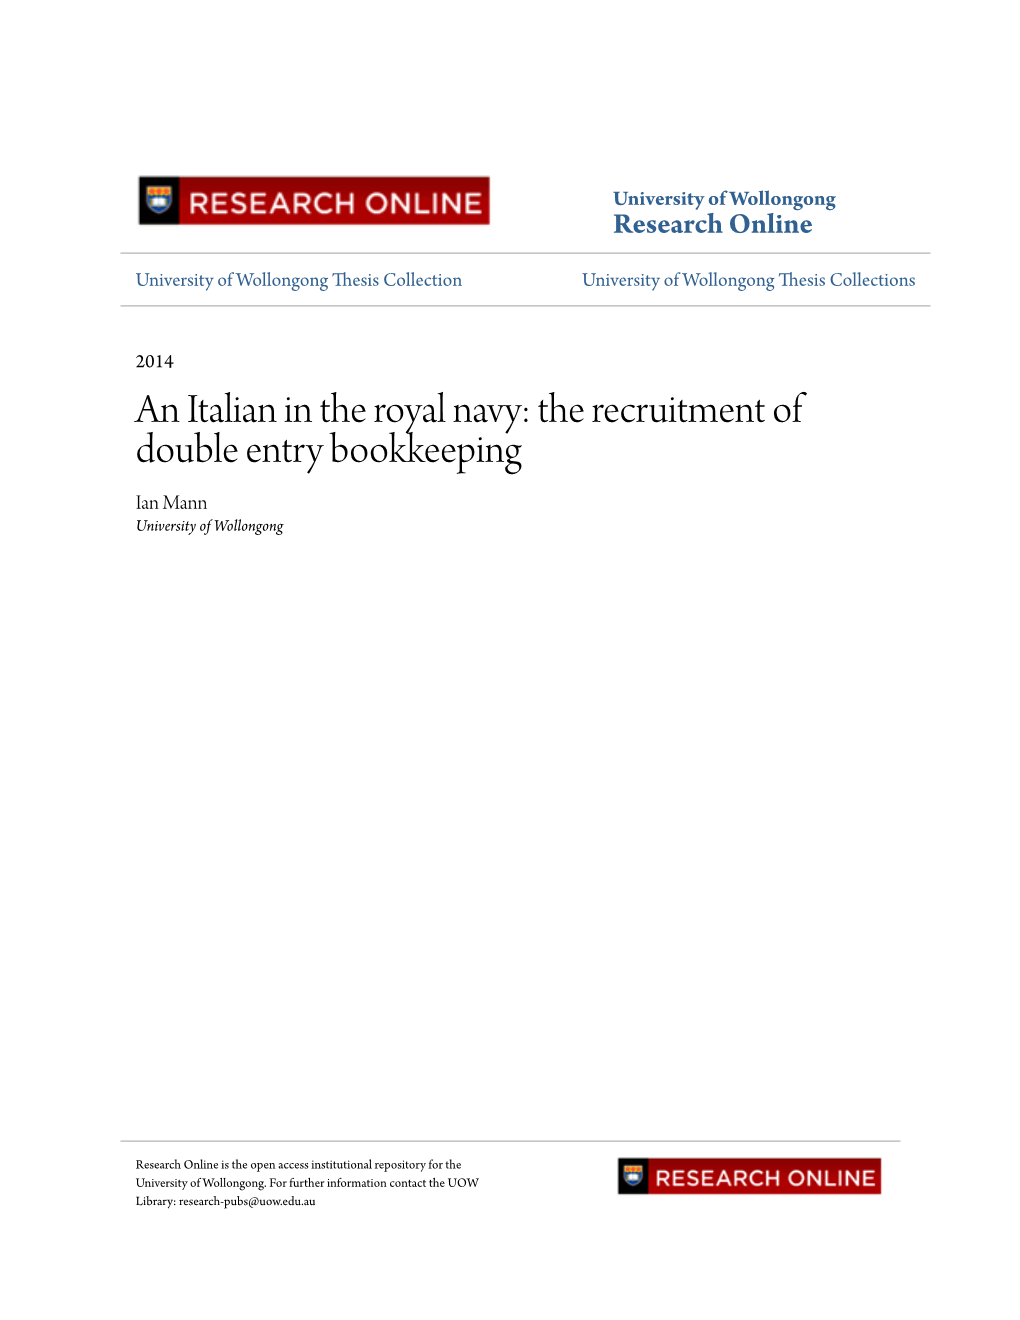 An Italian in the Royal Navy: the Recruitment of Double Entry Bookkeeping Ian Mann University of Wollongong